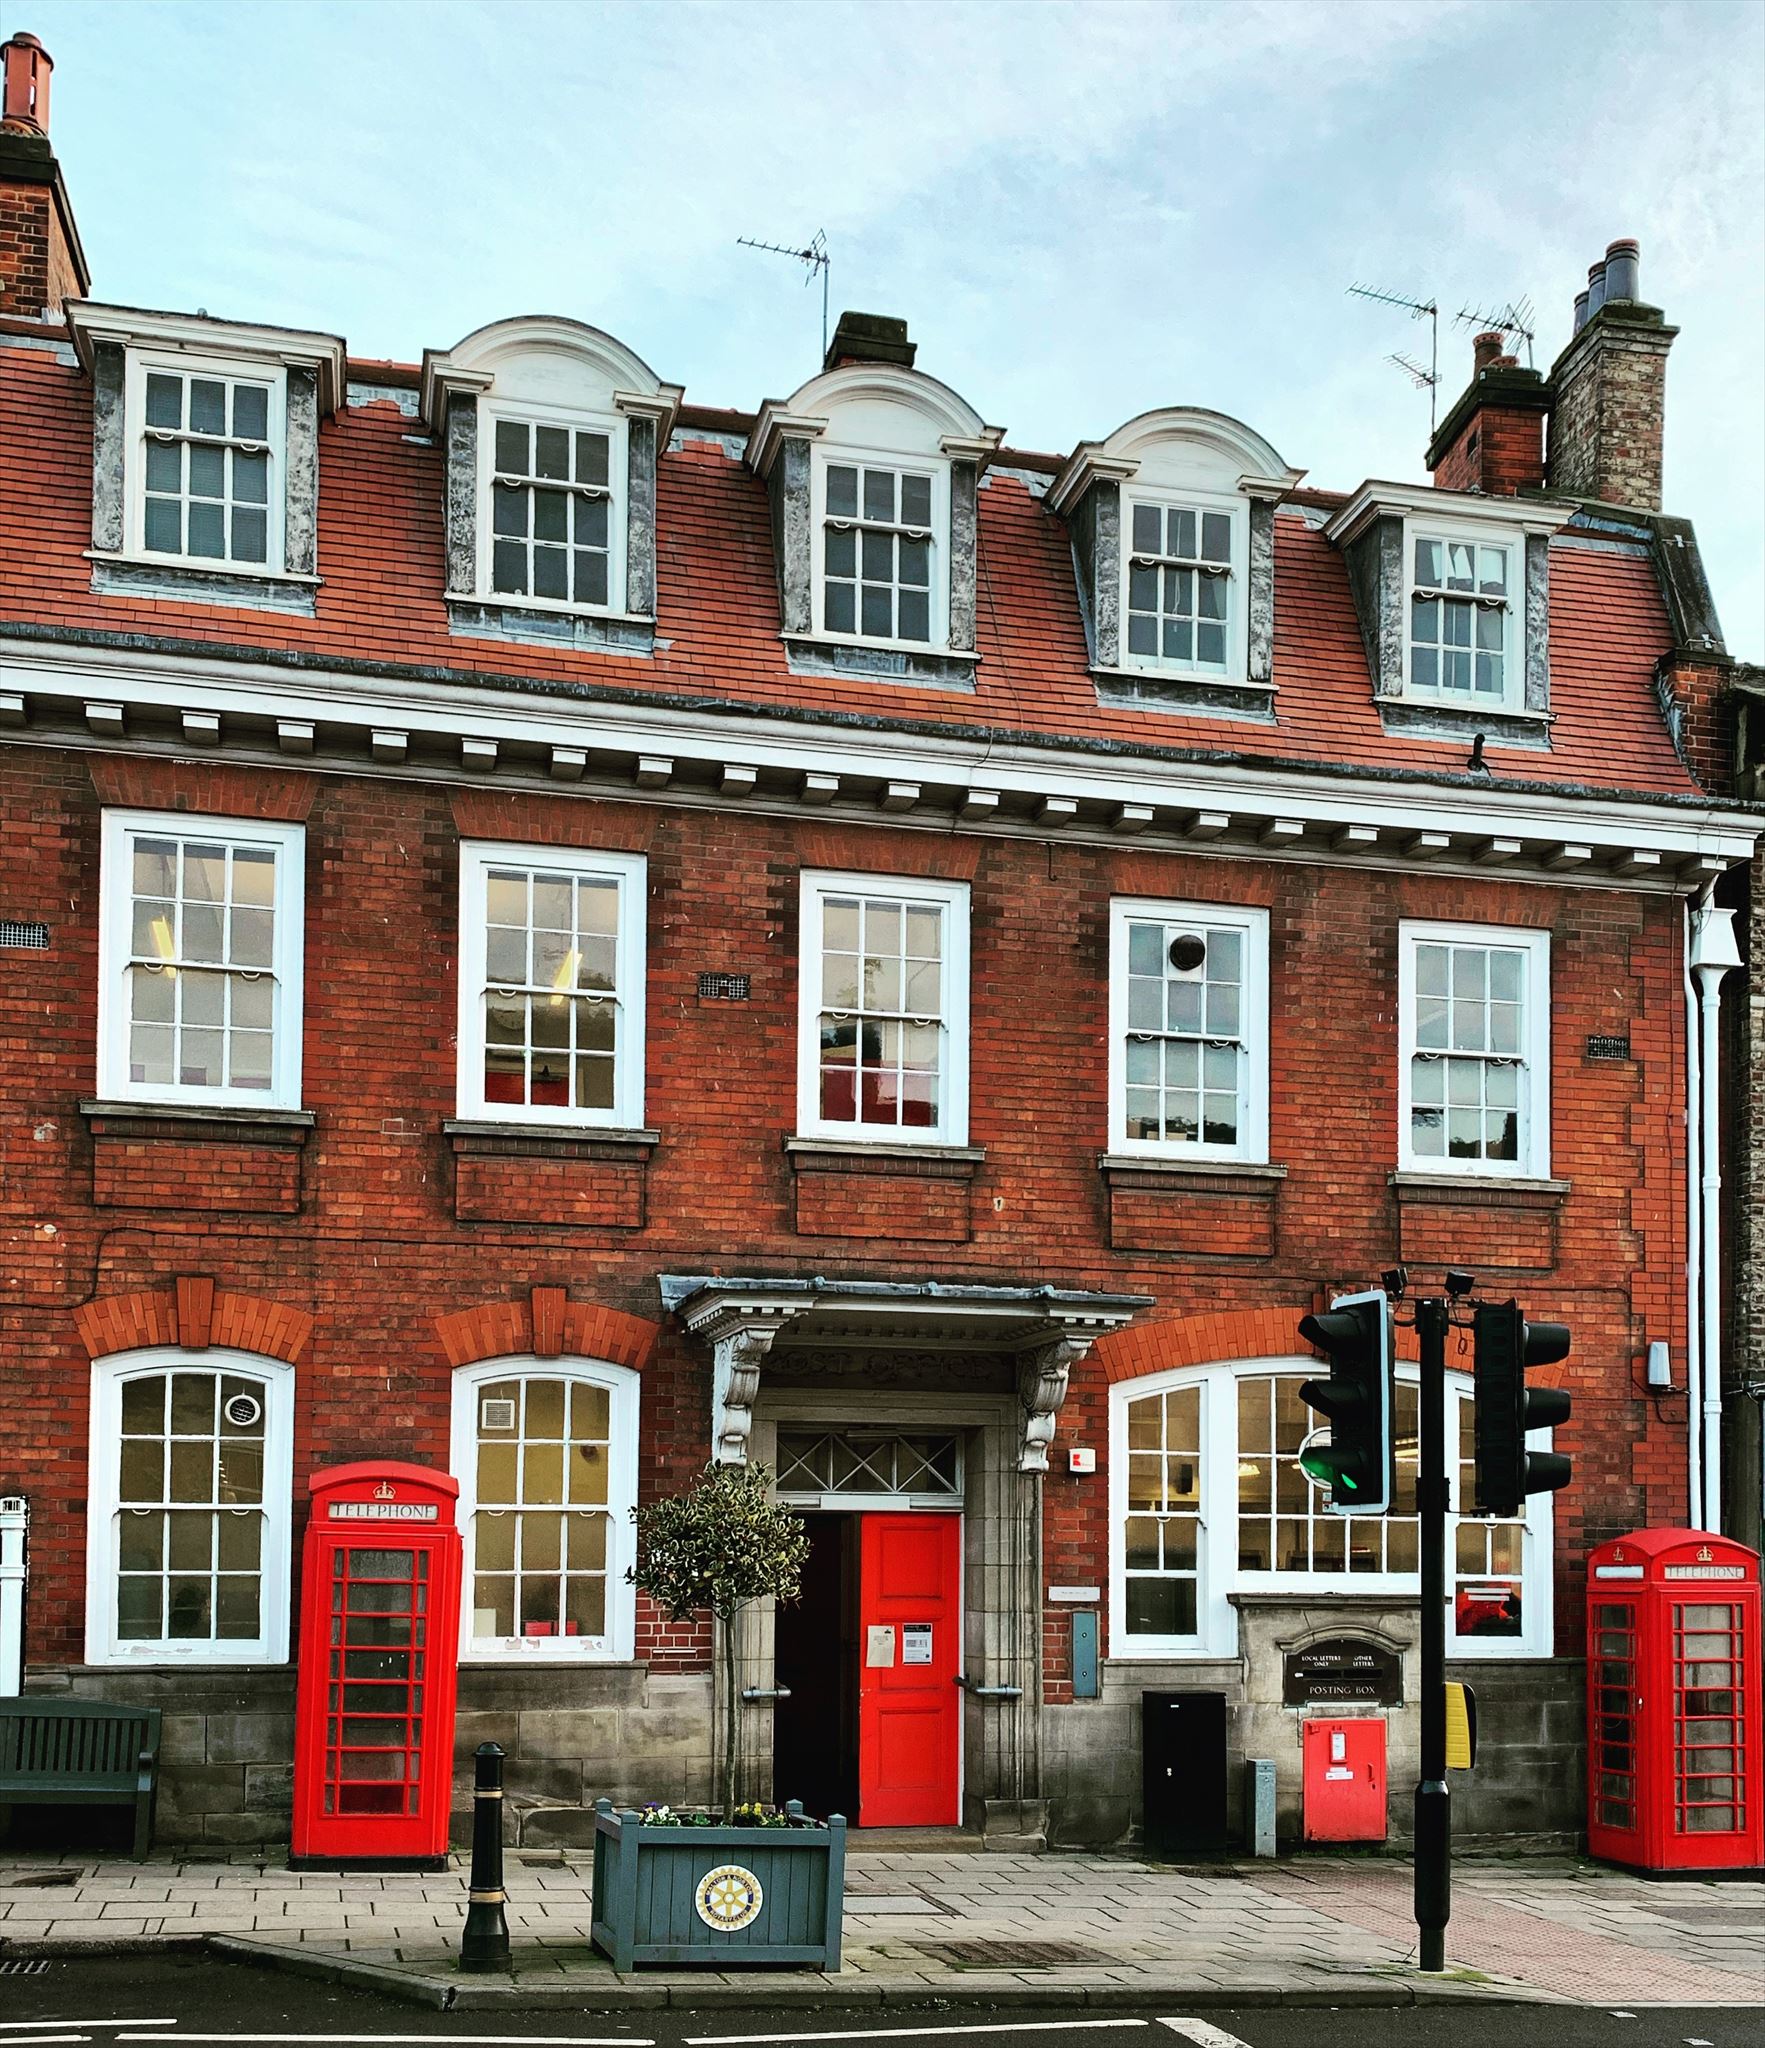 A Fine Pair #1520. Post Office, Wheelgate Malton with 2 x red K6 telephone boxes and a red post box. c2020